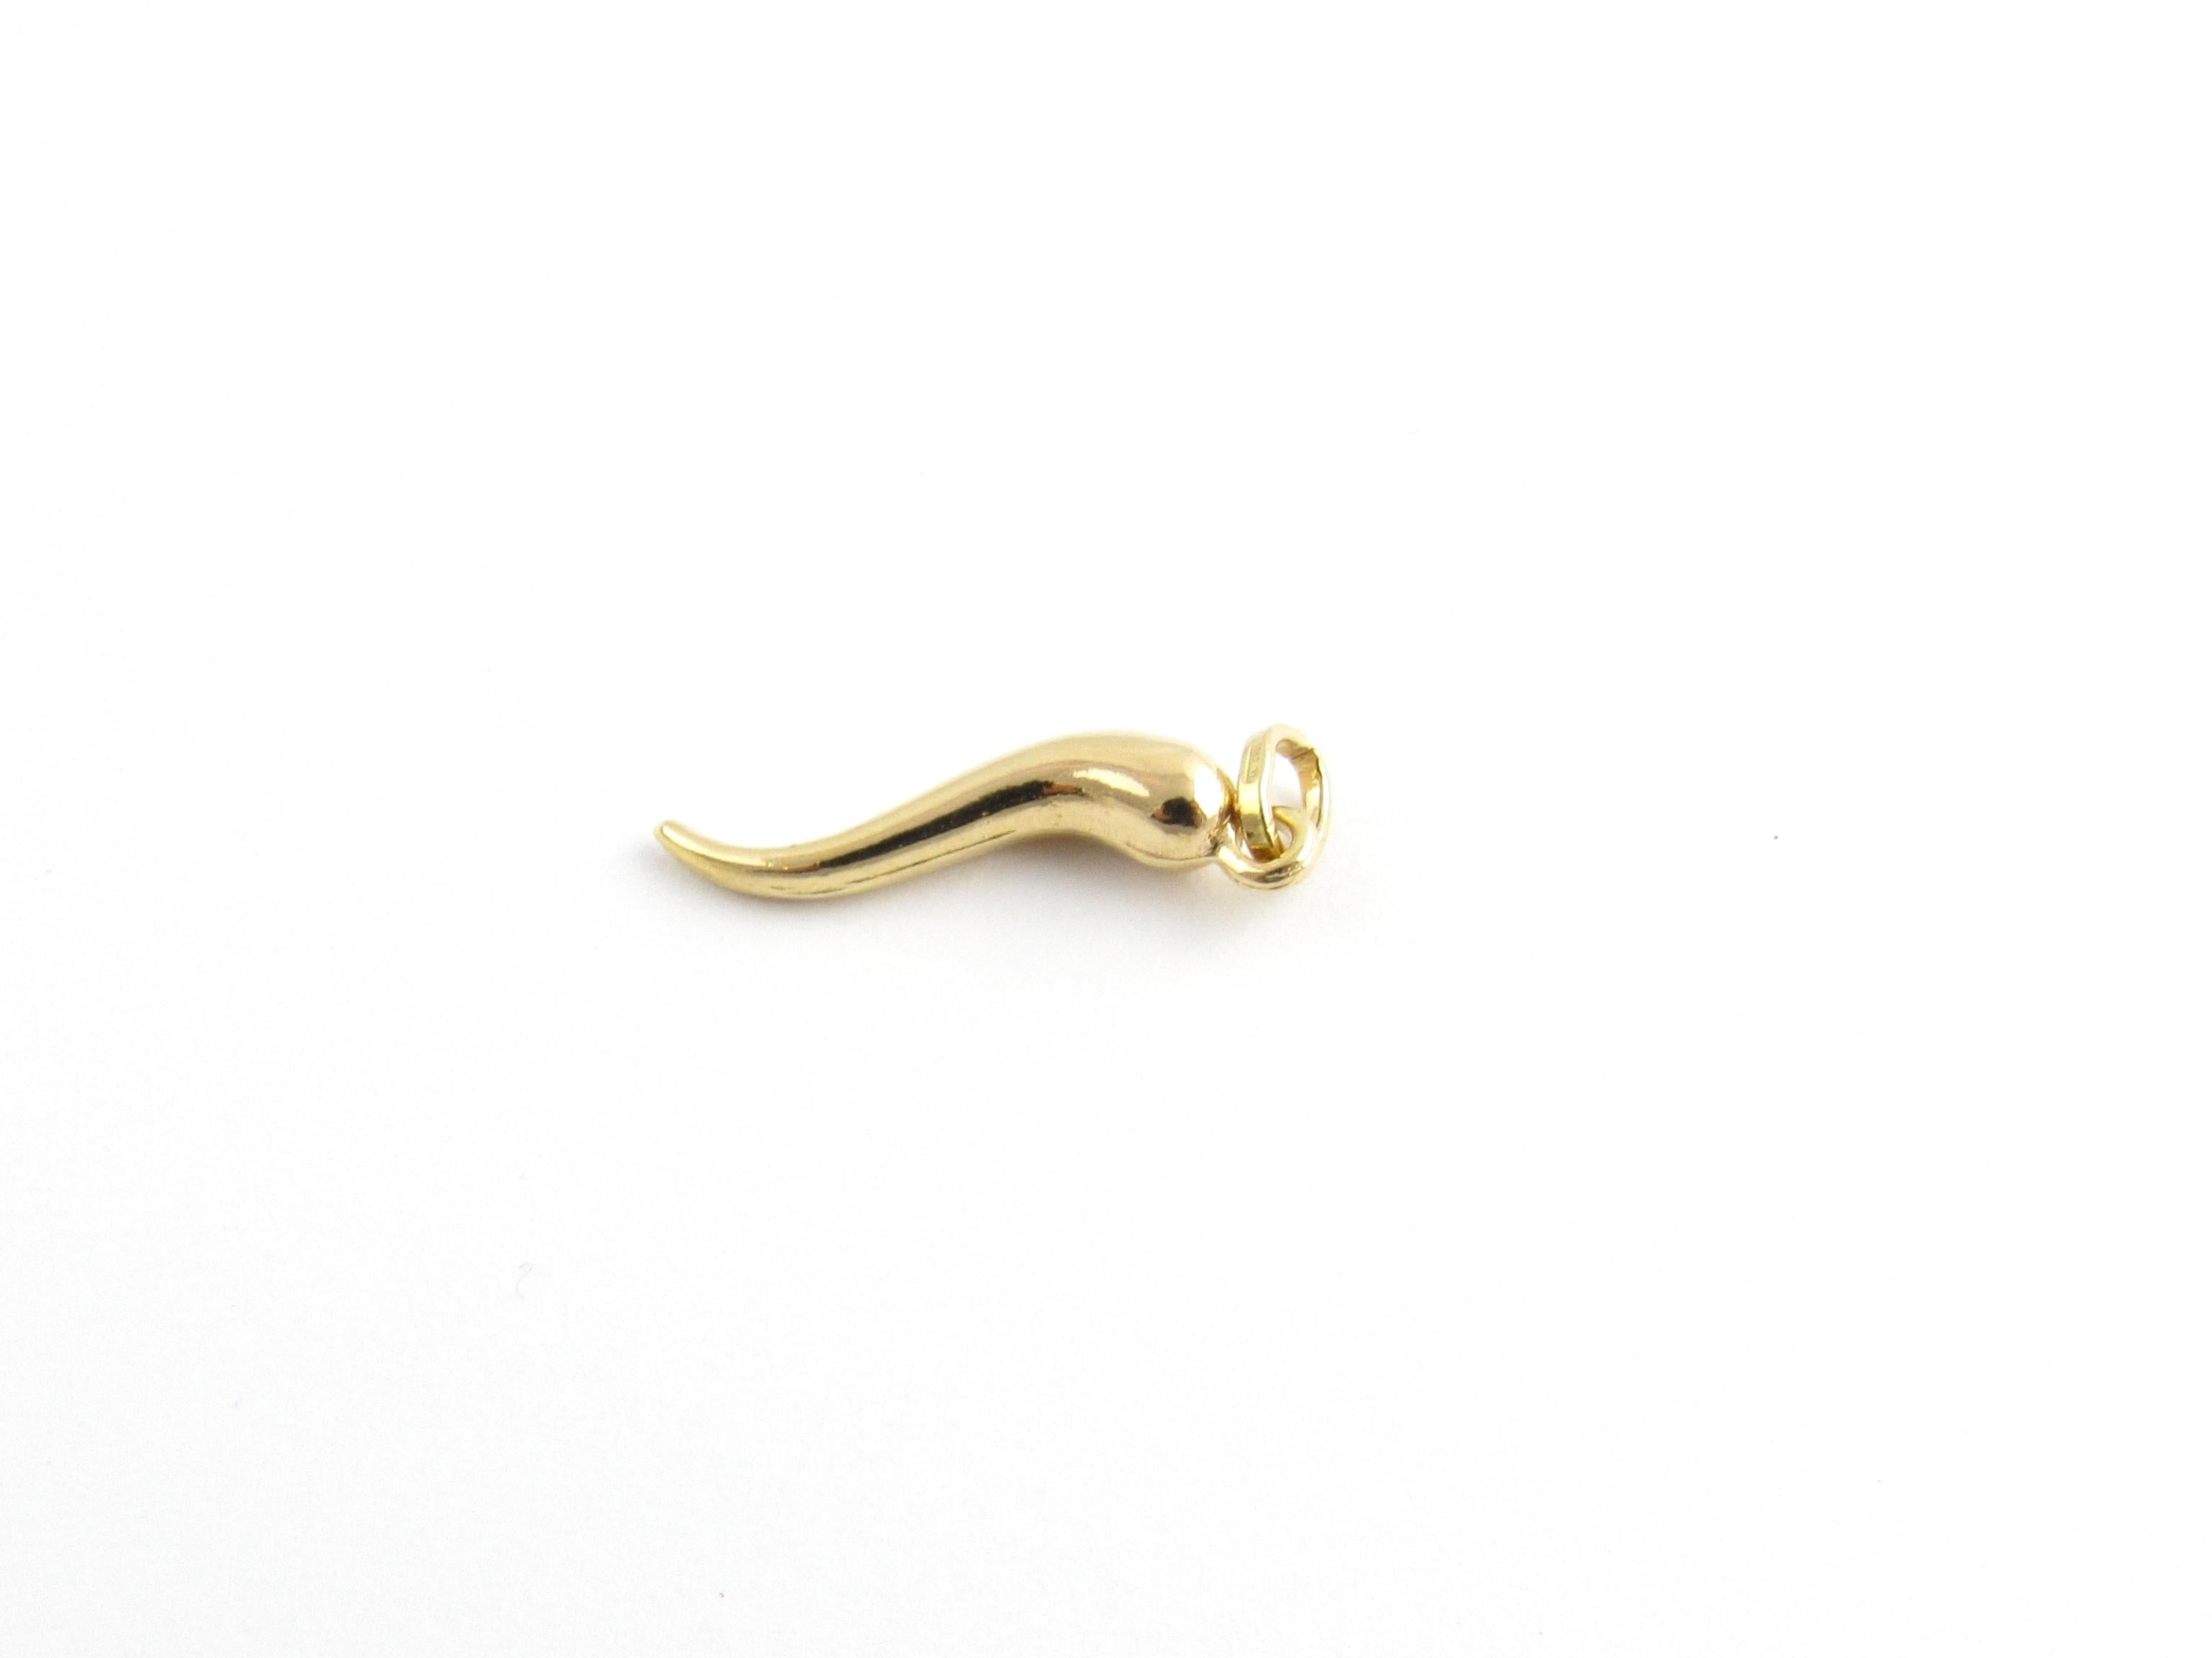 Vintage 18 Karat Yellow Gold Italian Horn Charm

The Italian horn is traditionally worn to ward off the 